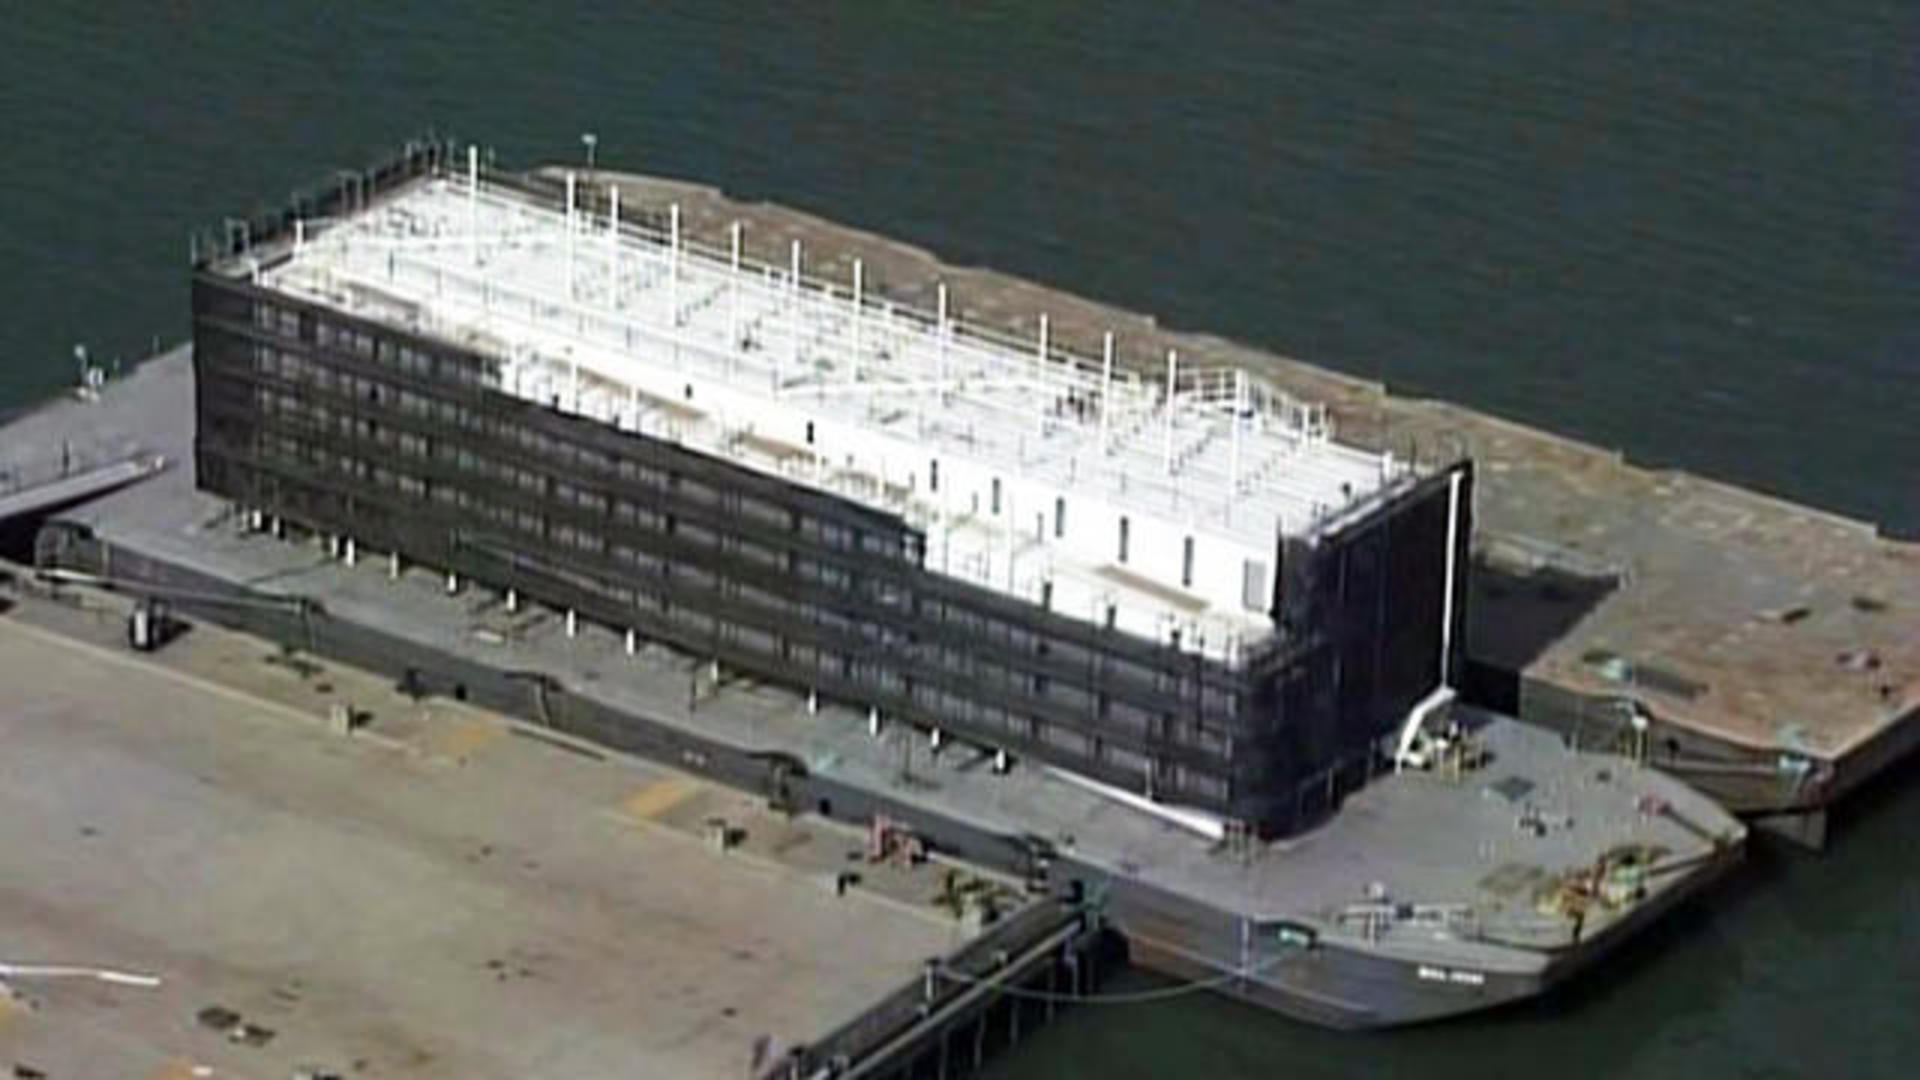 Google's so-called mystery barge must relocate in light of permit